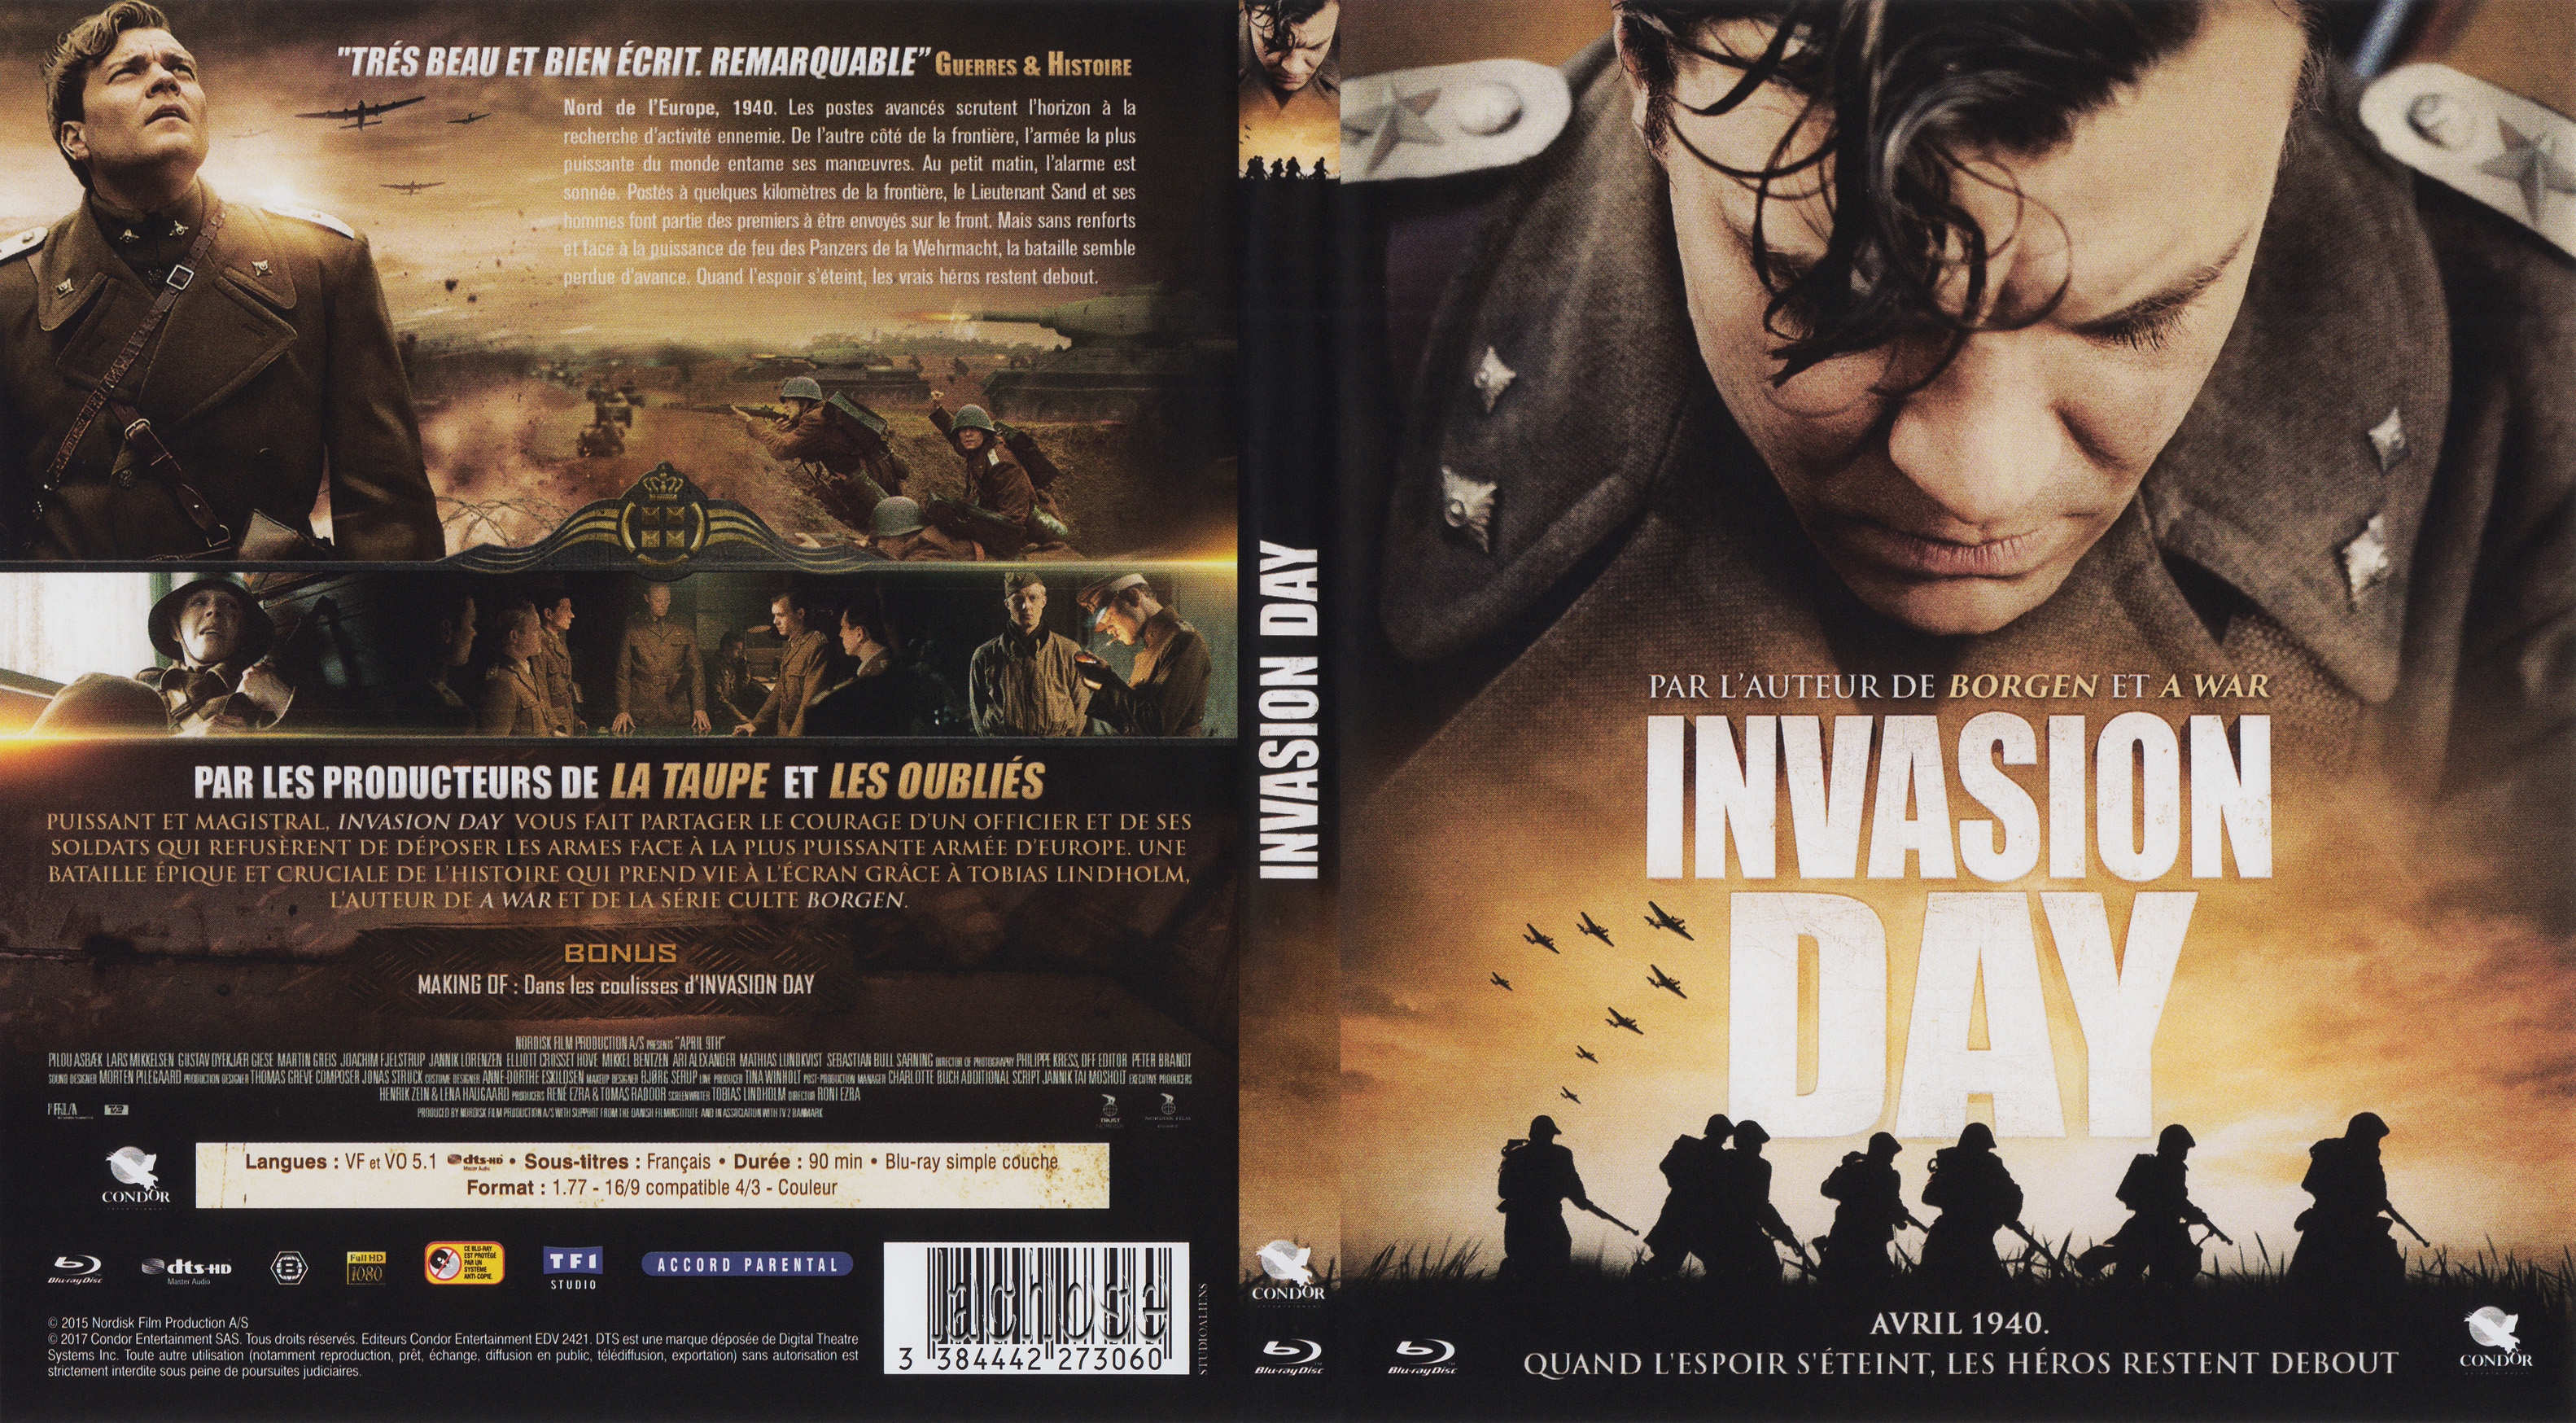 Jaquette DVD Invasion day (BLU-RAY)